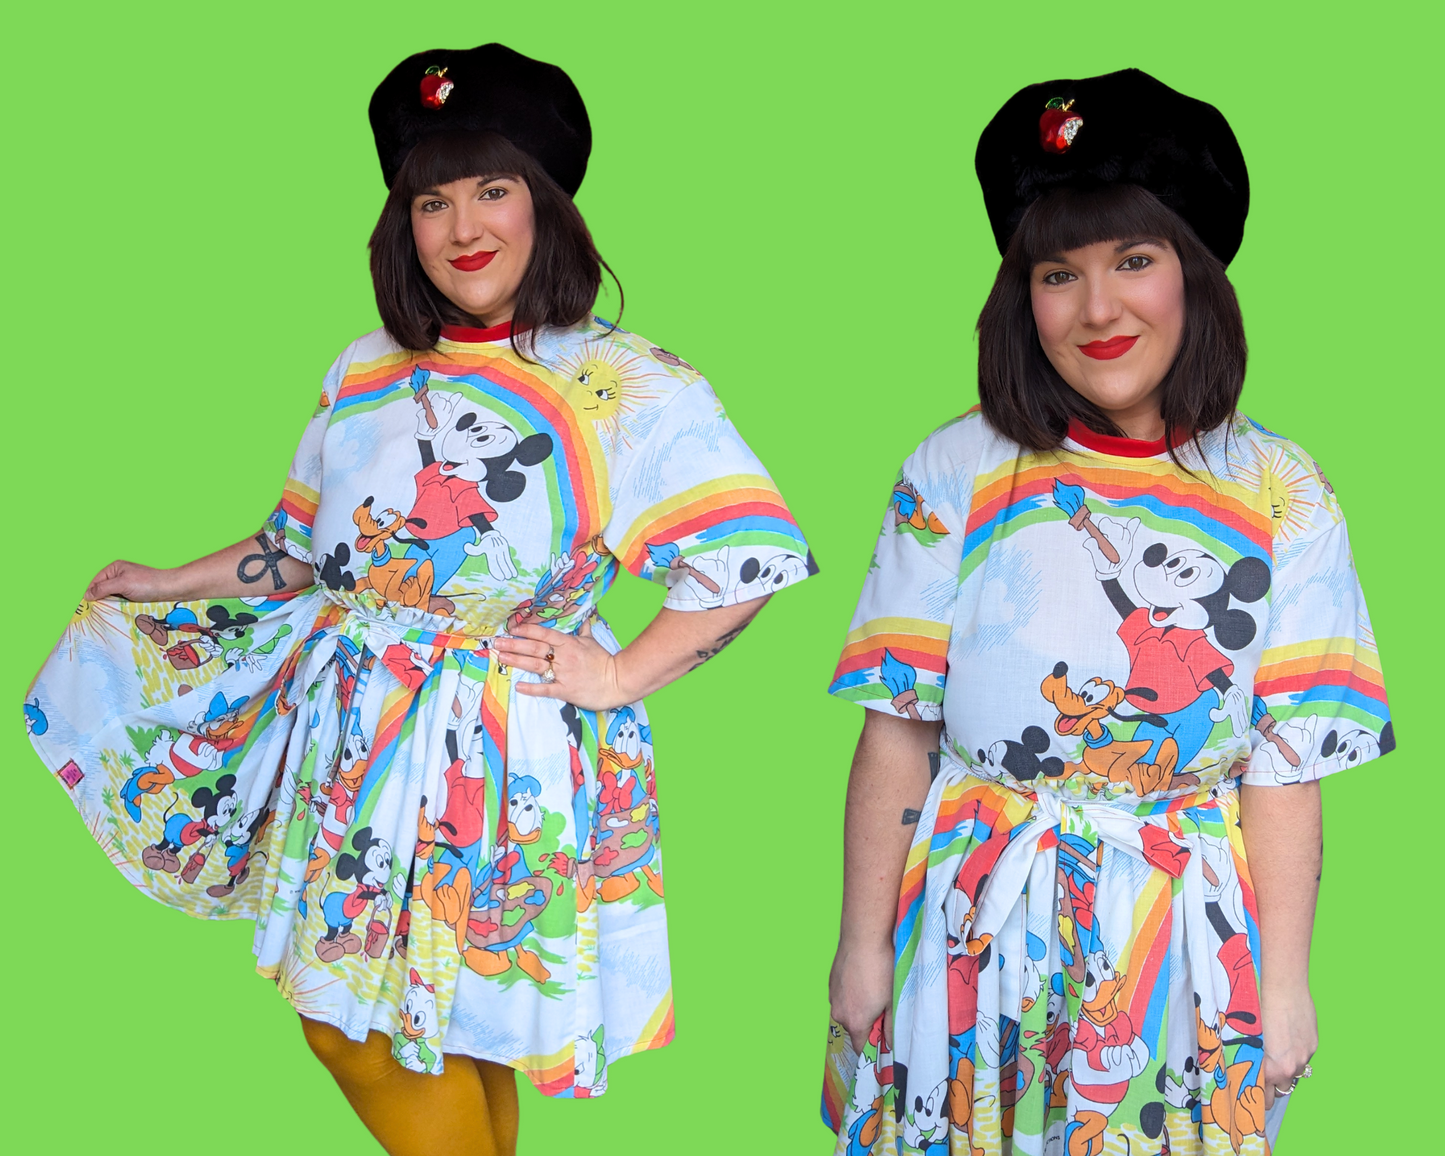 Handmade, Upcycled Walt Disney's Vintage 1980's Mickey Mouse and Friends Painting Bedsheet T-Shirt Dress Fits S-M-L-XL